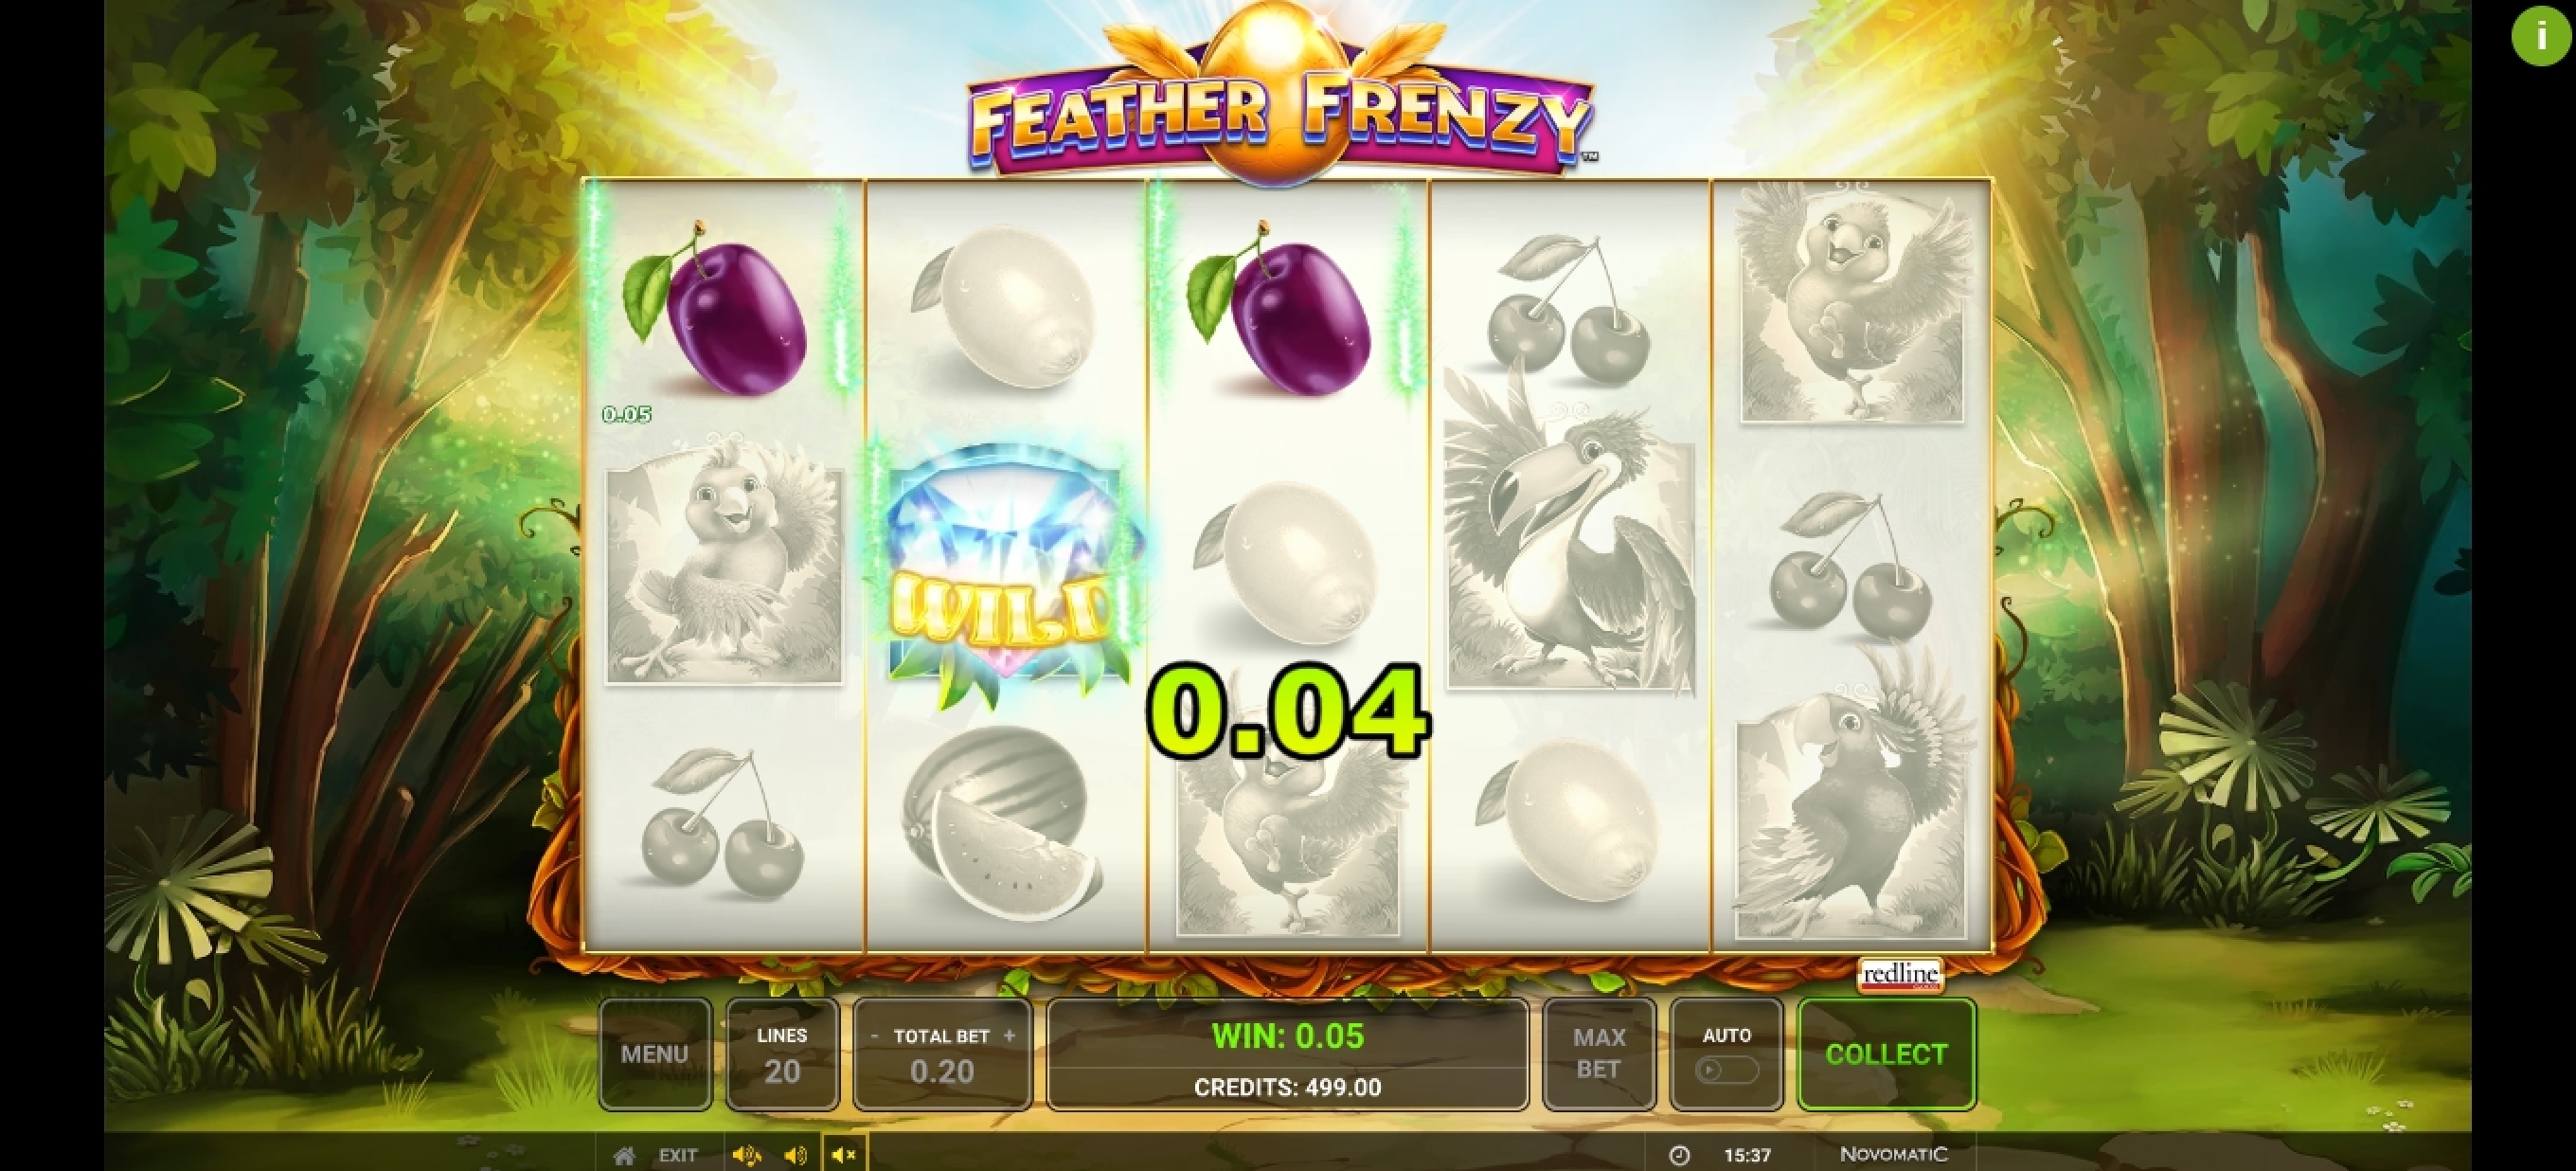 Win Money in Feather Frenzy Free Slot Game by Greentube